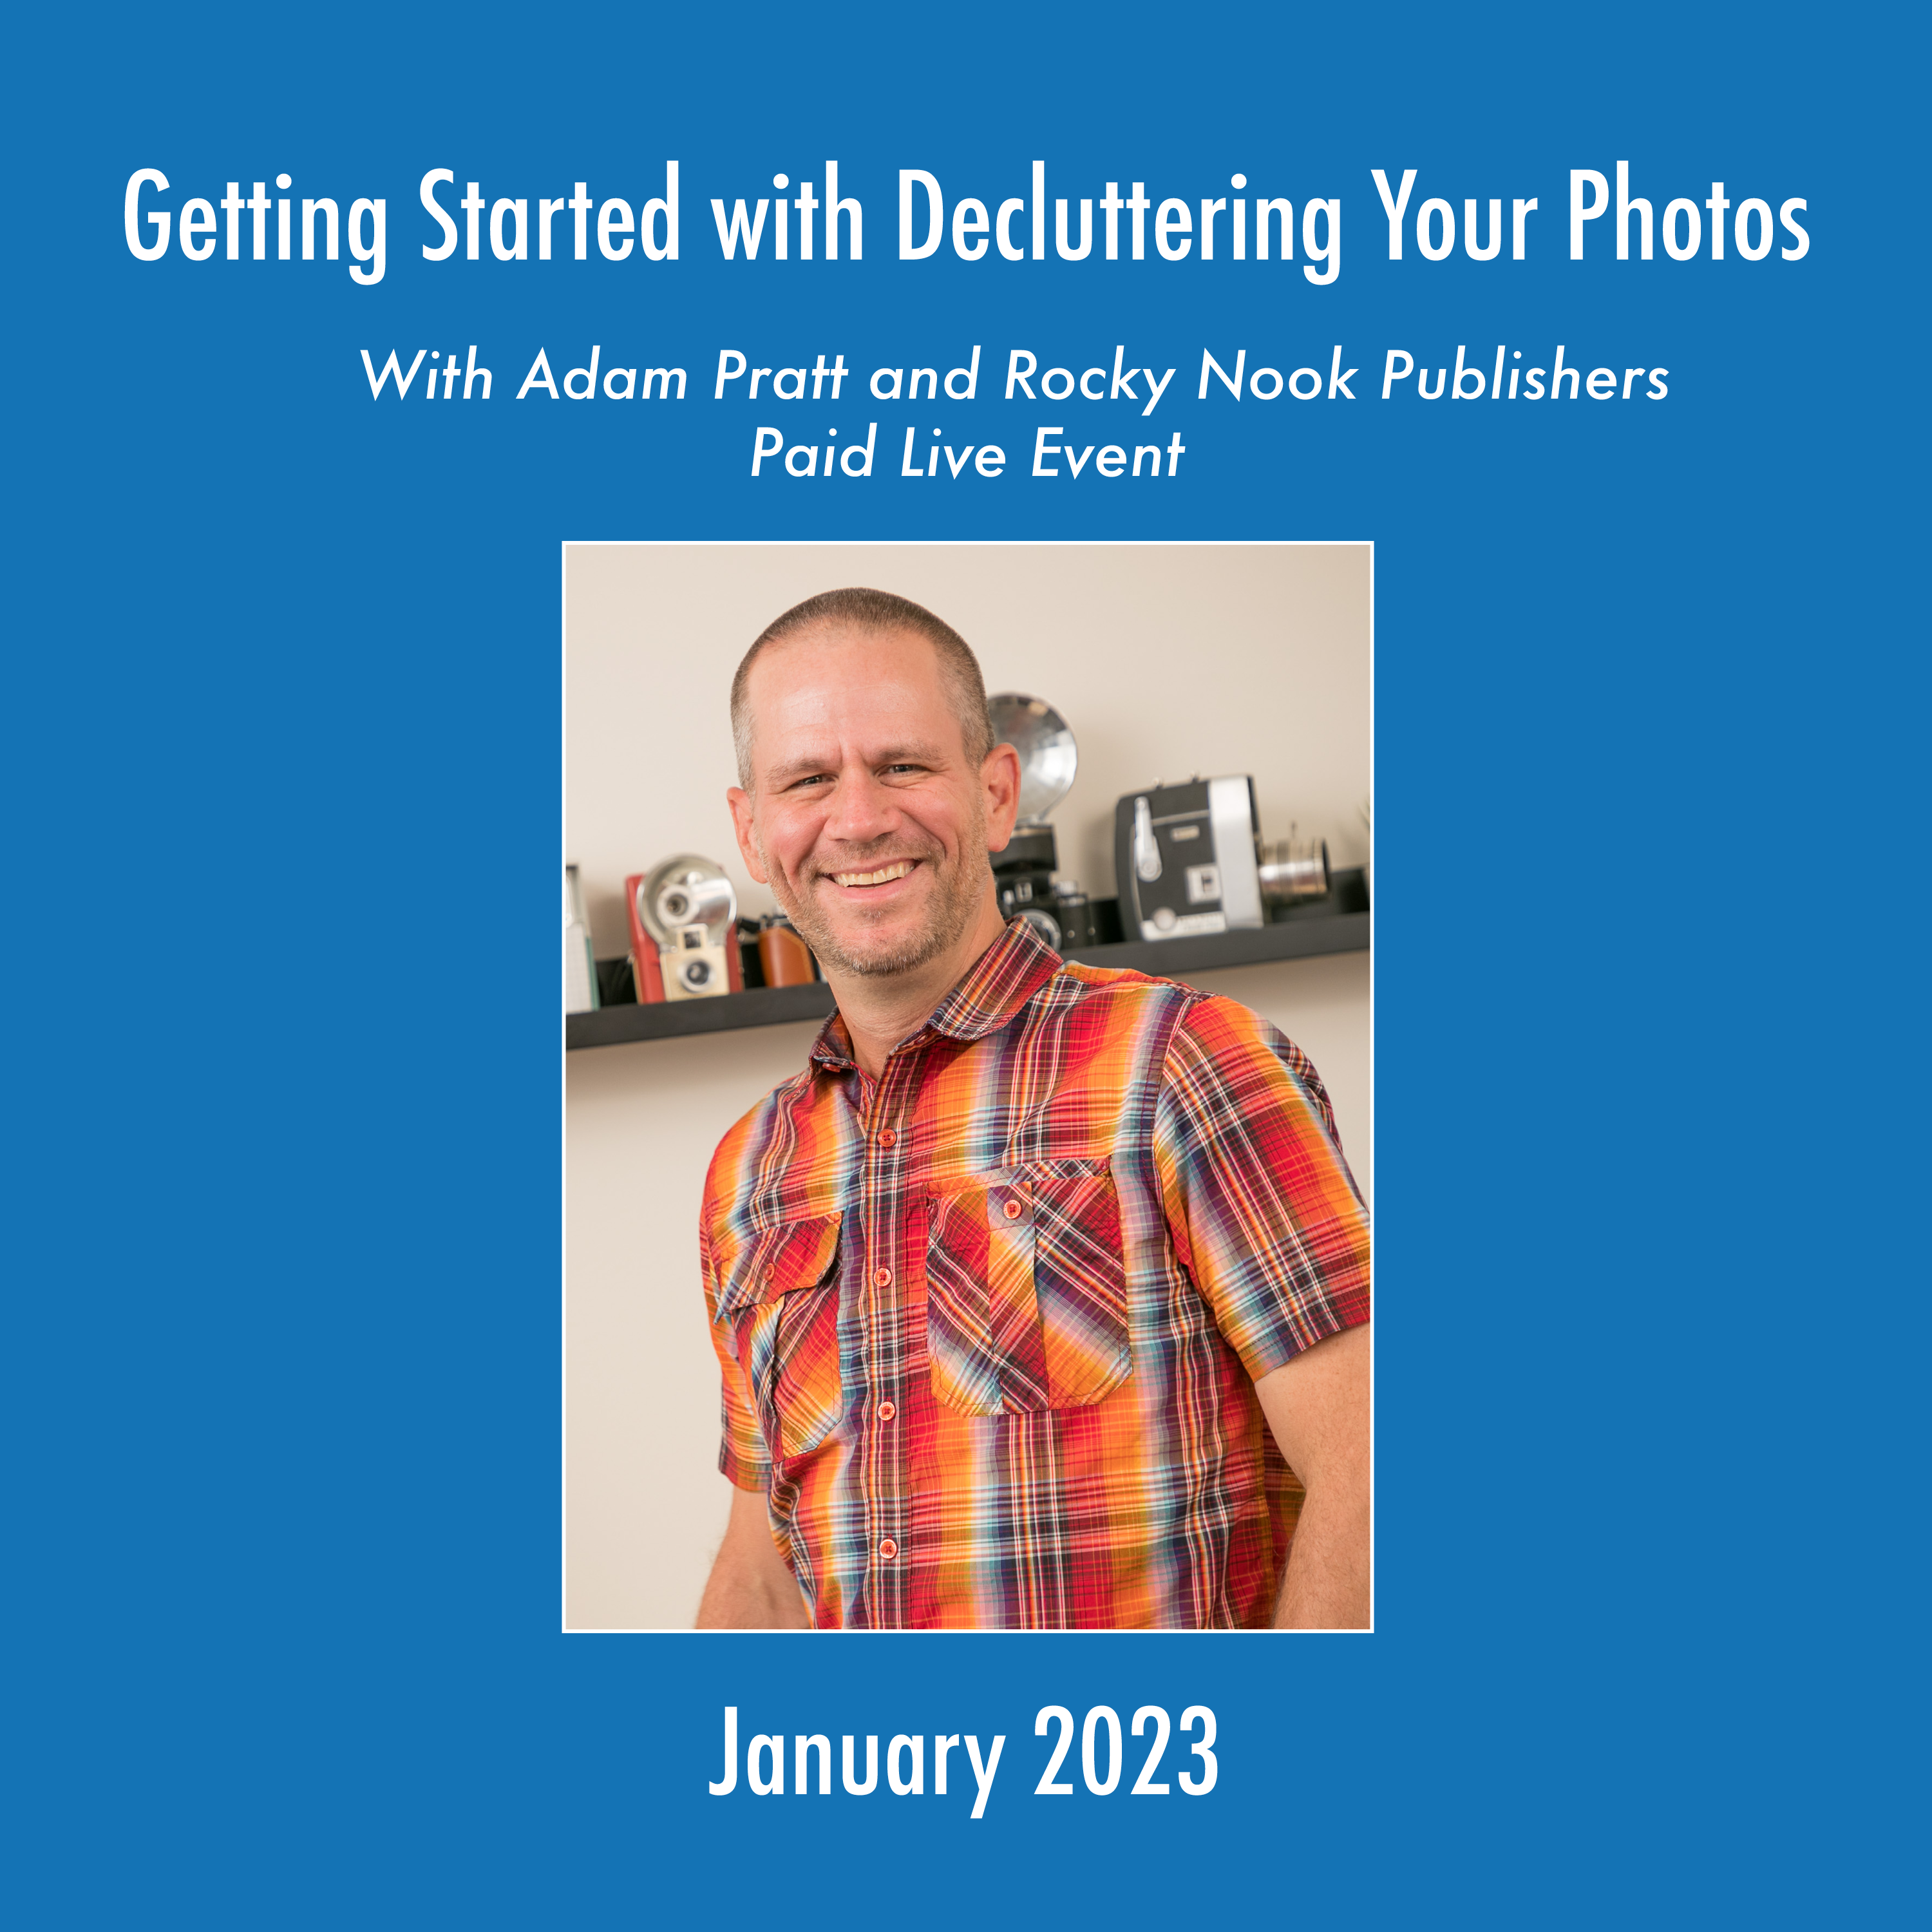 Getting Started with Decluttering your Photos with Adam Pratt and Rocky Nook